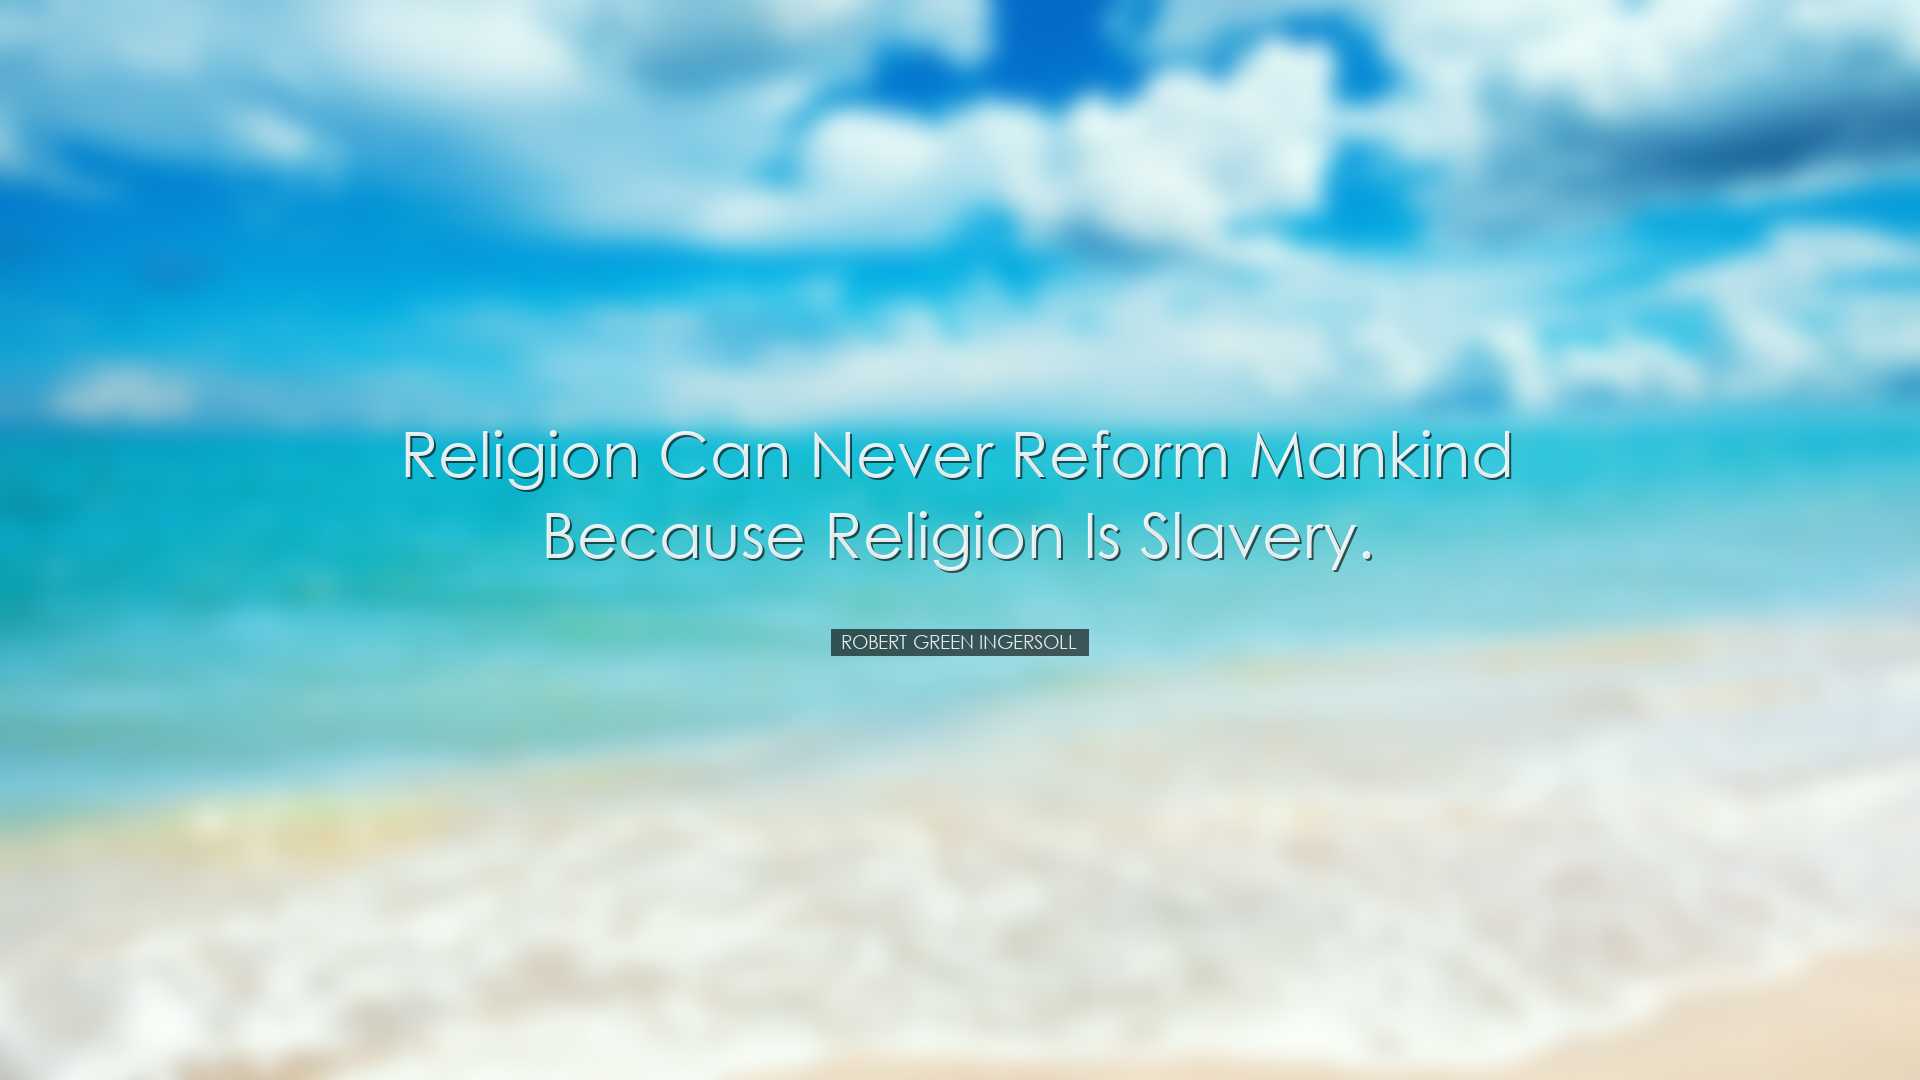 Religion can never reform mankind because religion is slavery. - R